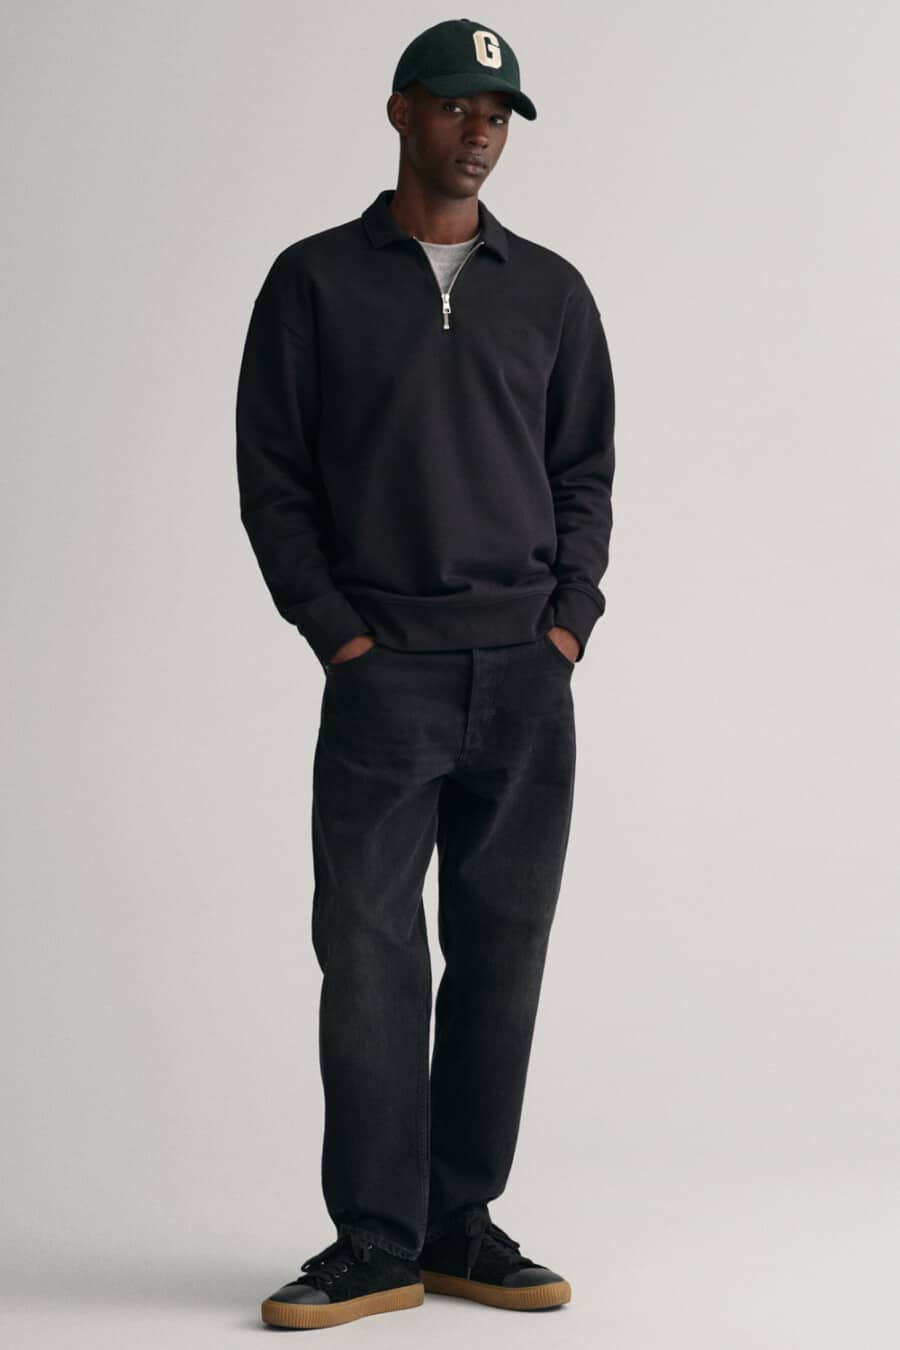 Men's black baggy jeans, grey T-shirt, black quarter-zip sweater and black gum sole sneakers outfit